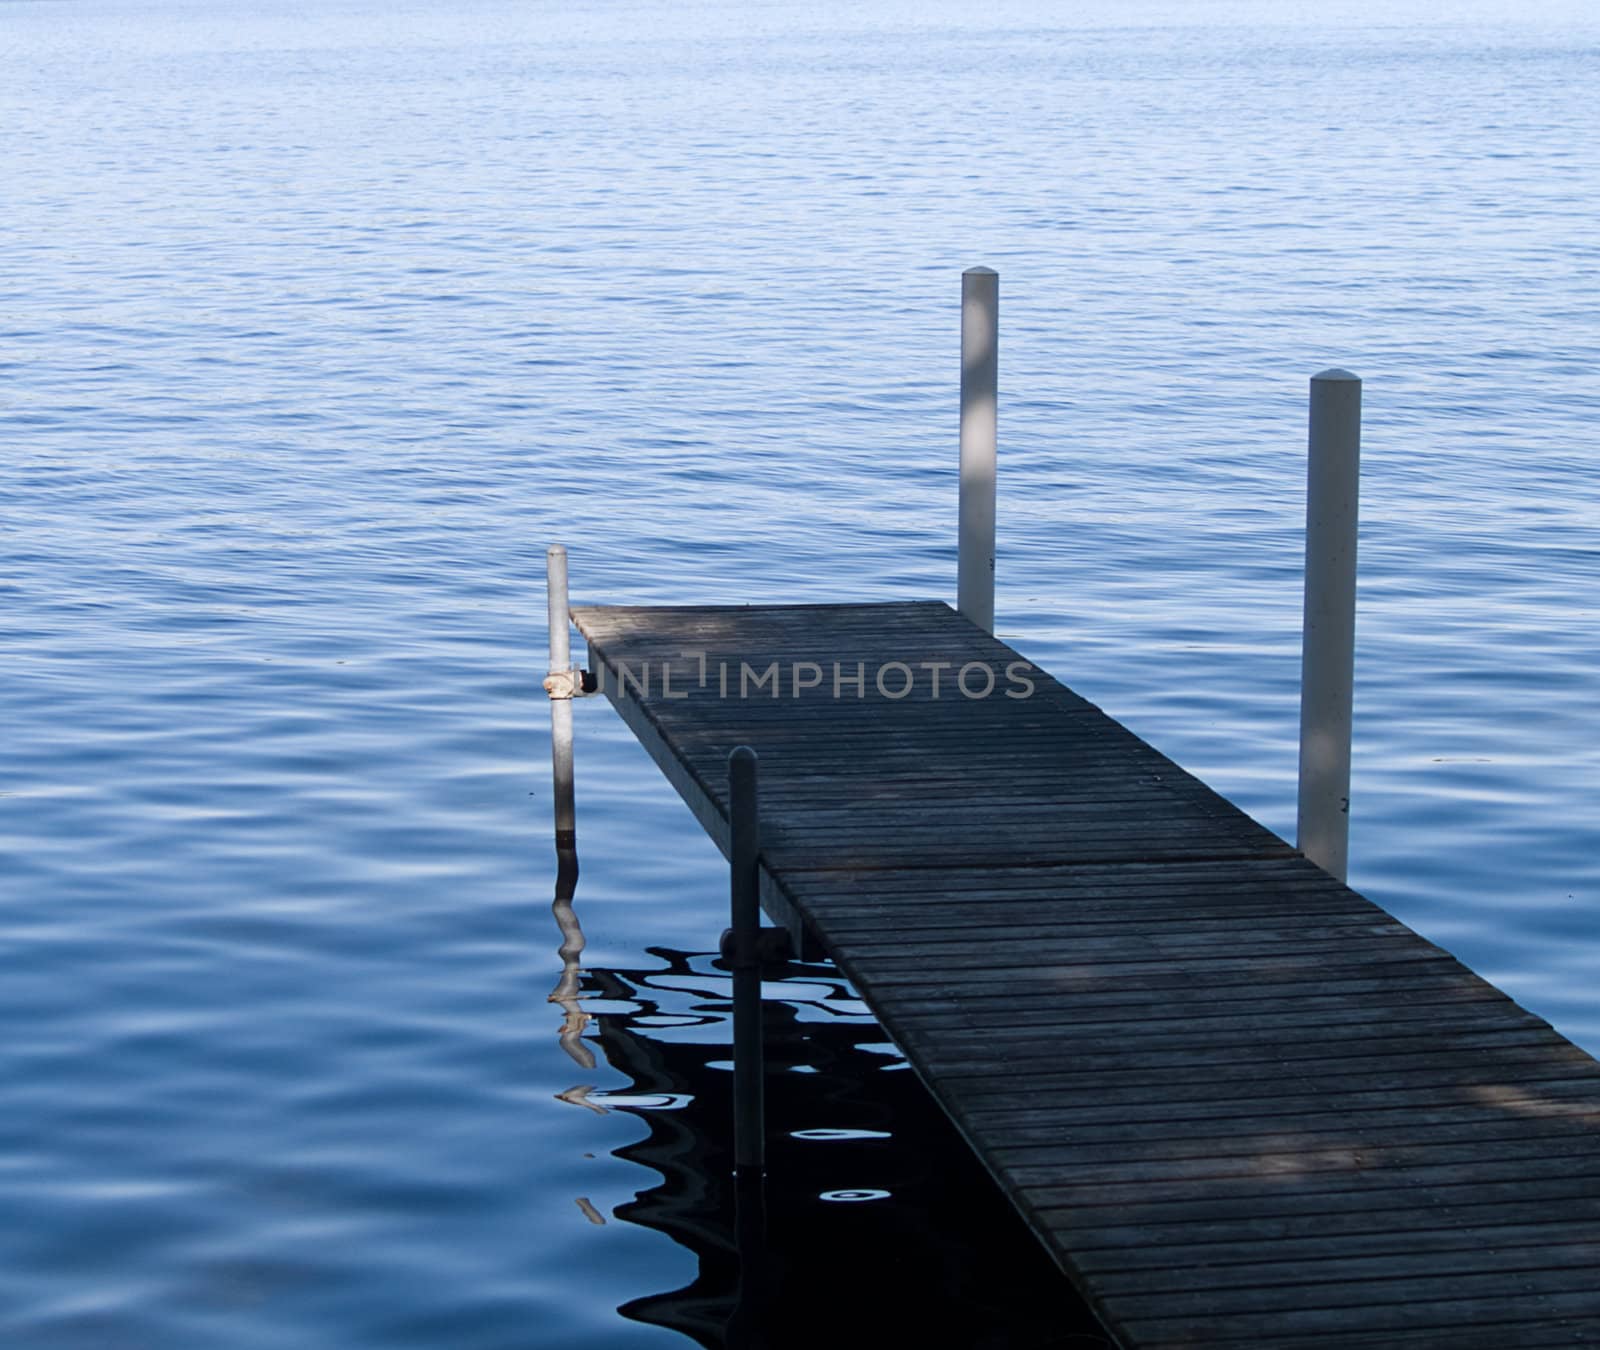 Taken in the morning, a pier allowing access to a lake.